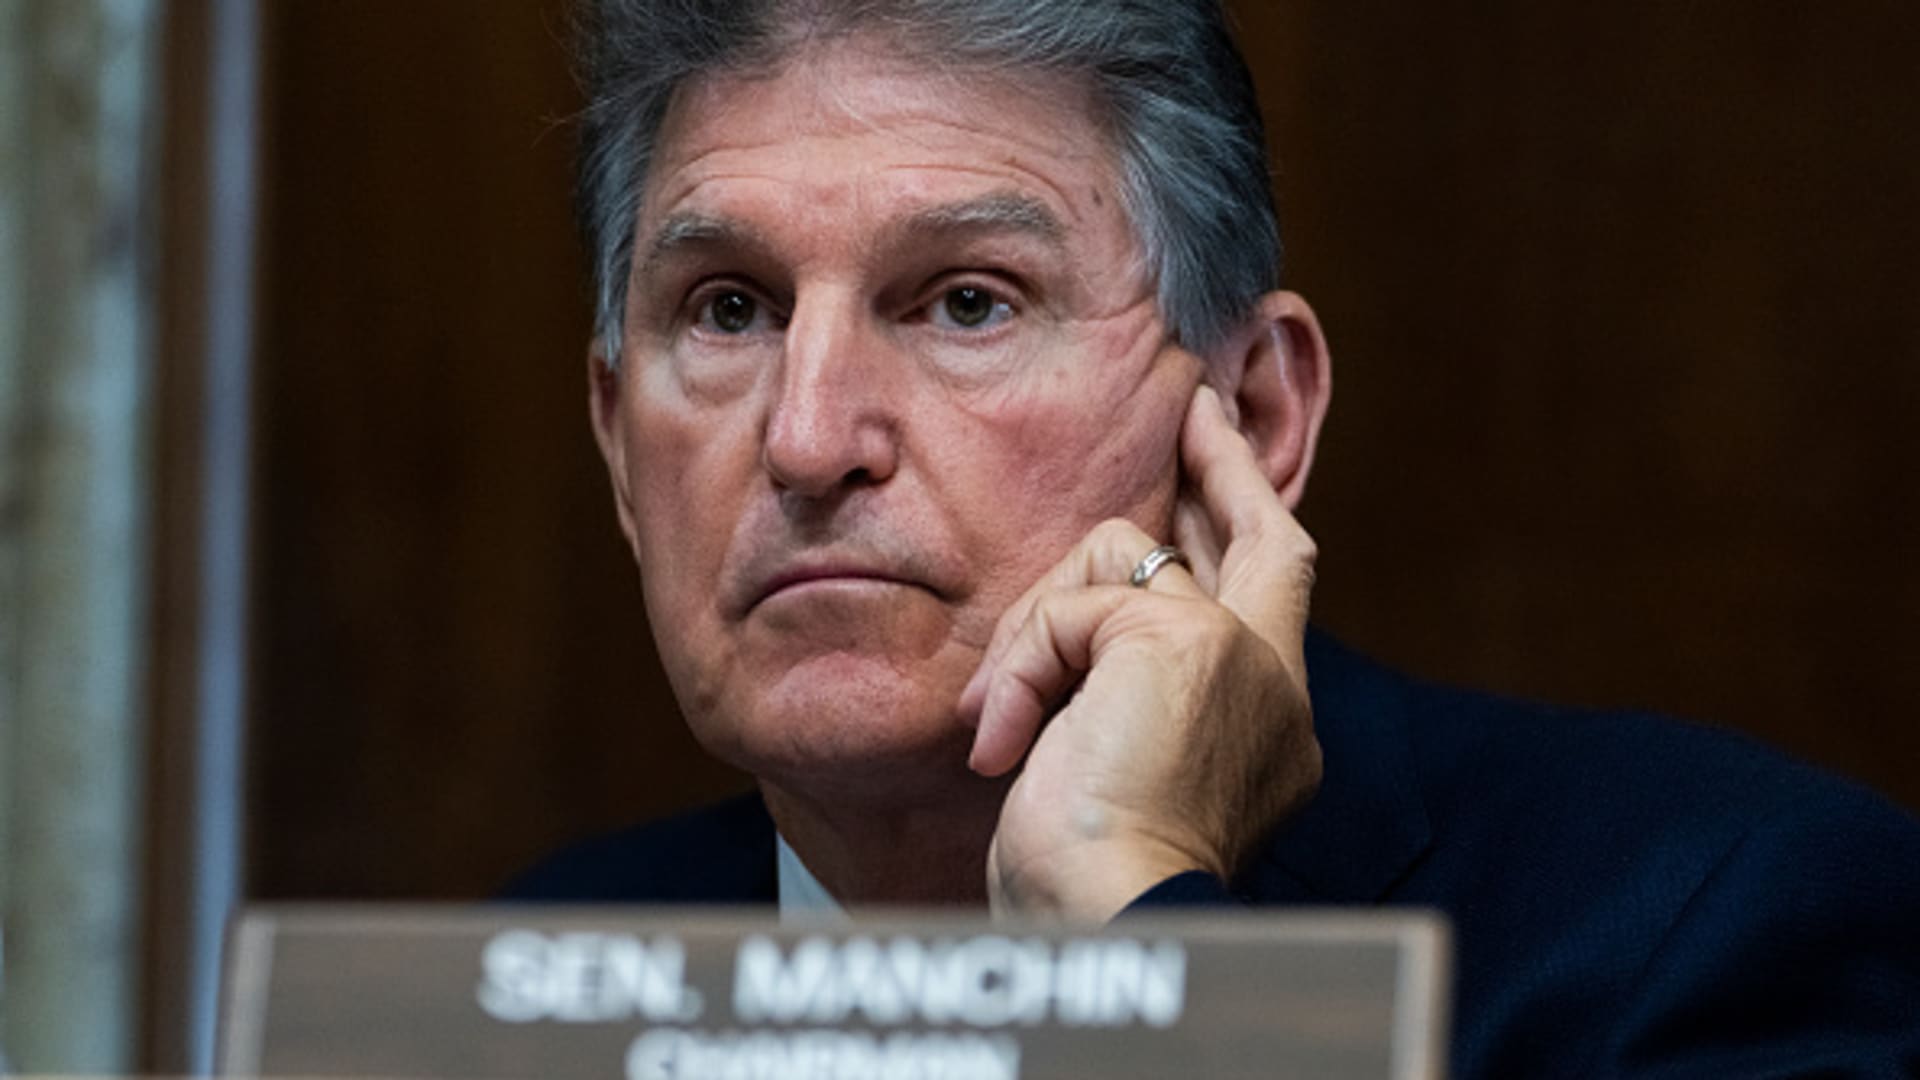 Joe Manchin opposes the SEC’s climate disclosure rule